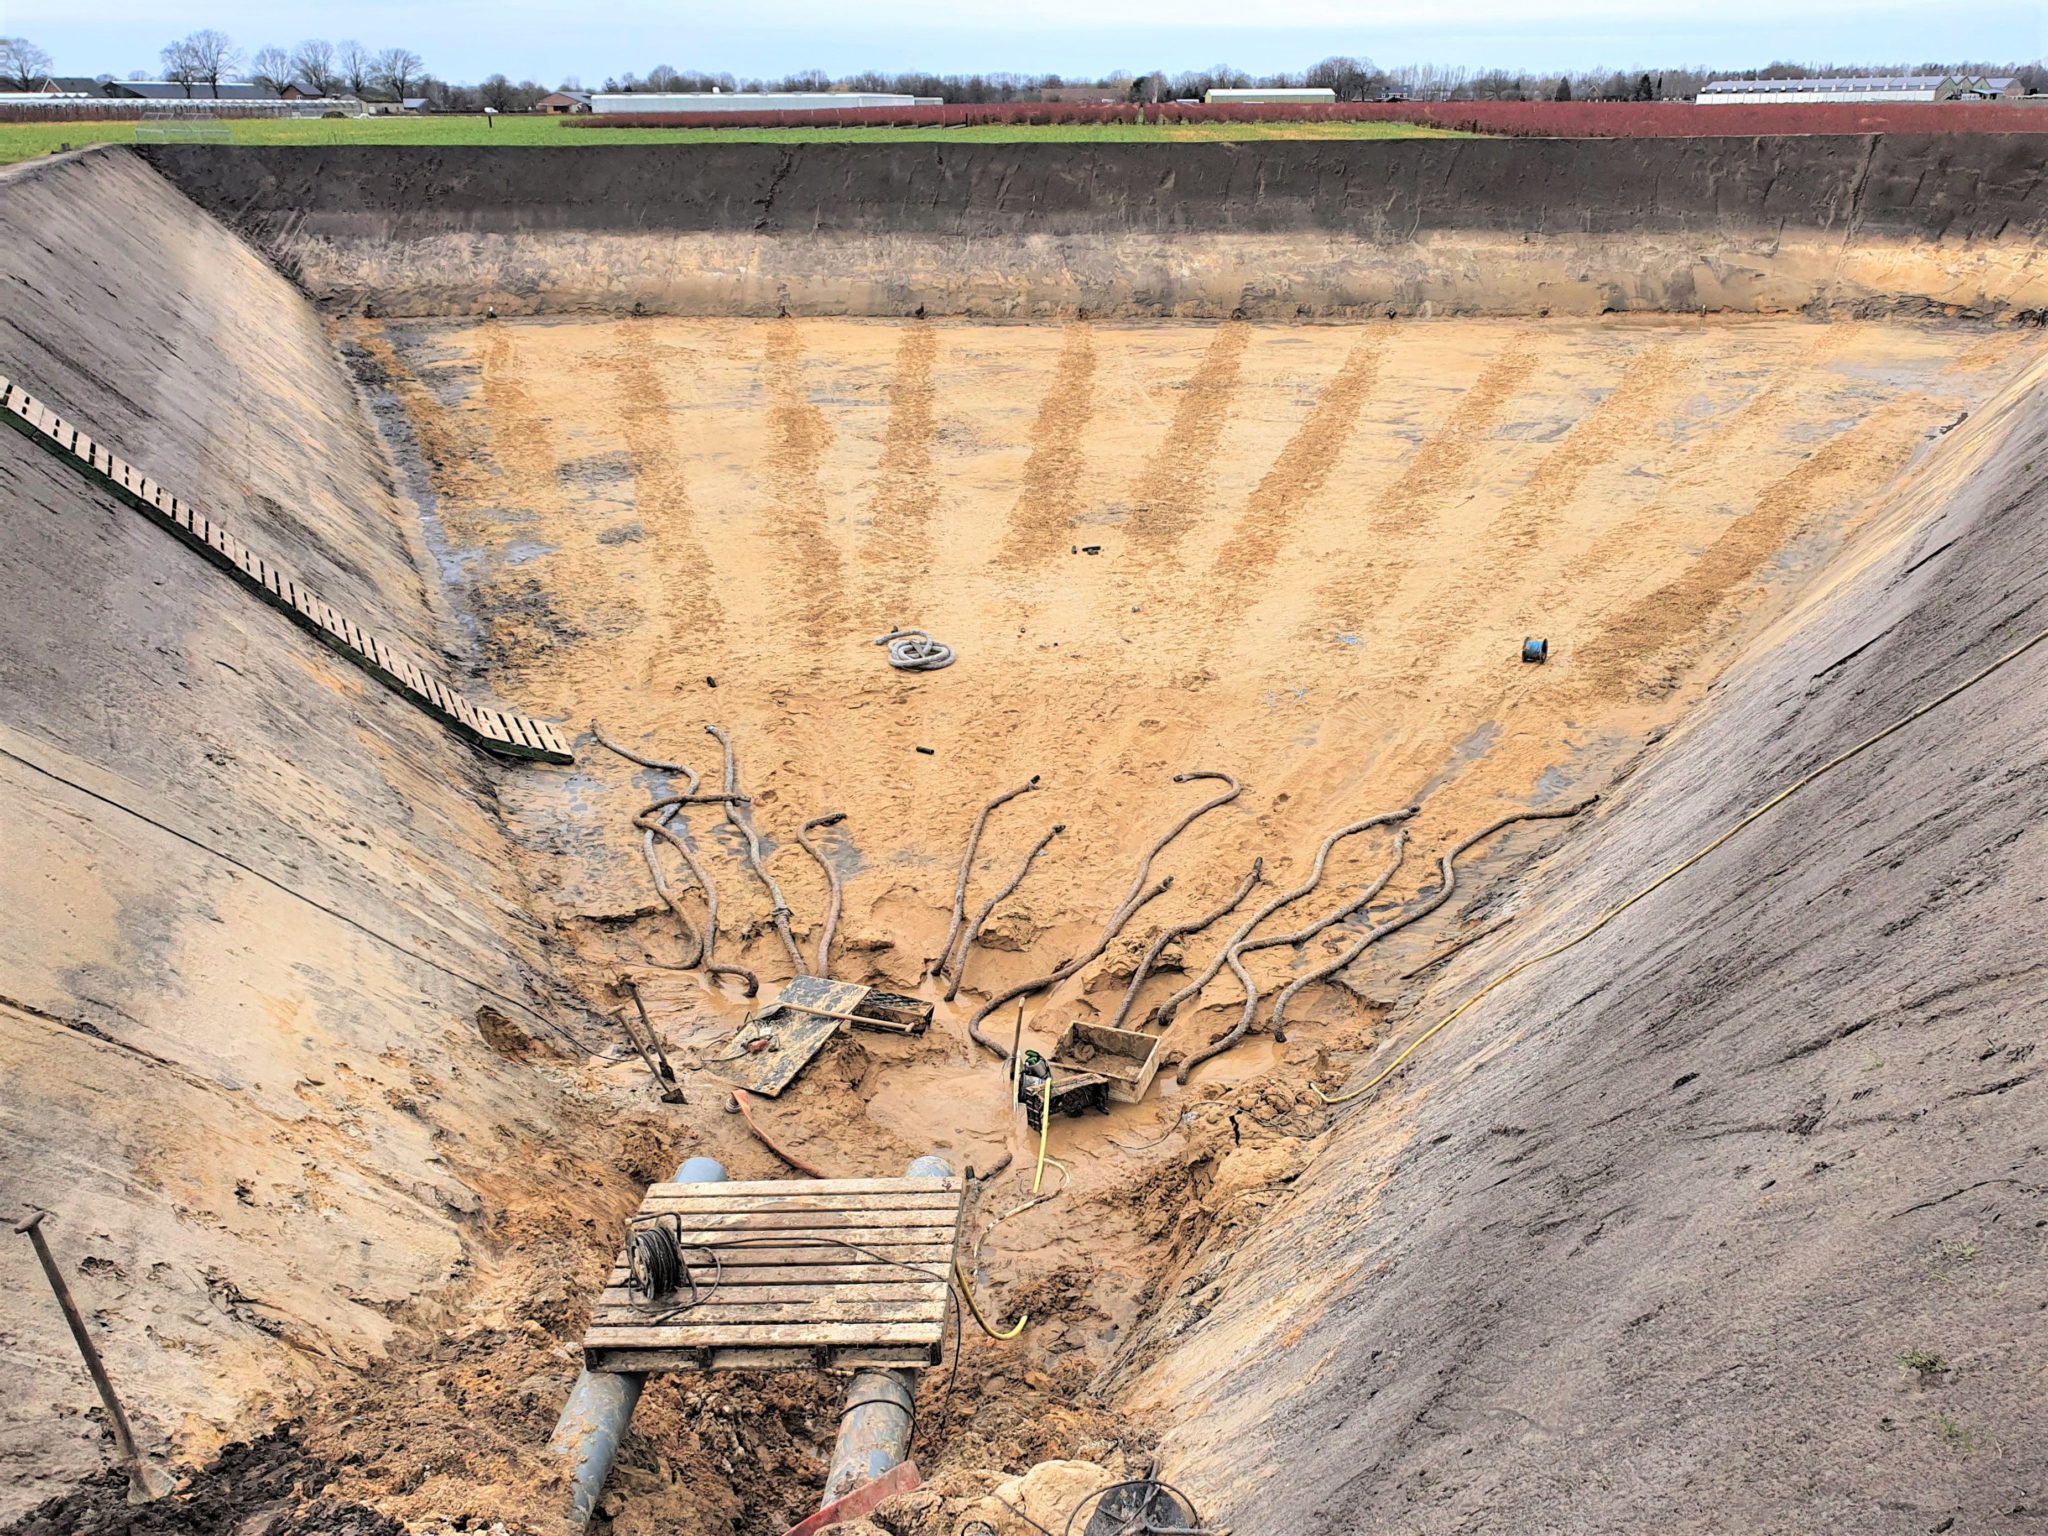 Excavated basins for blueberry growers, the Netherlands